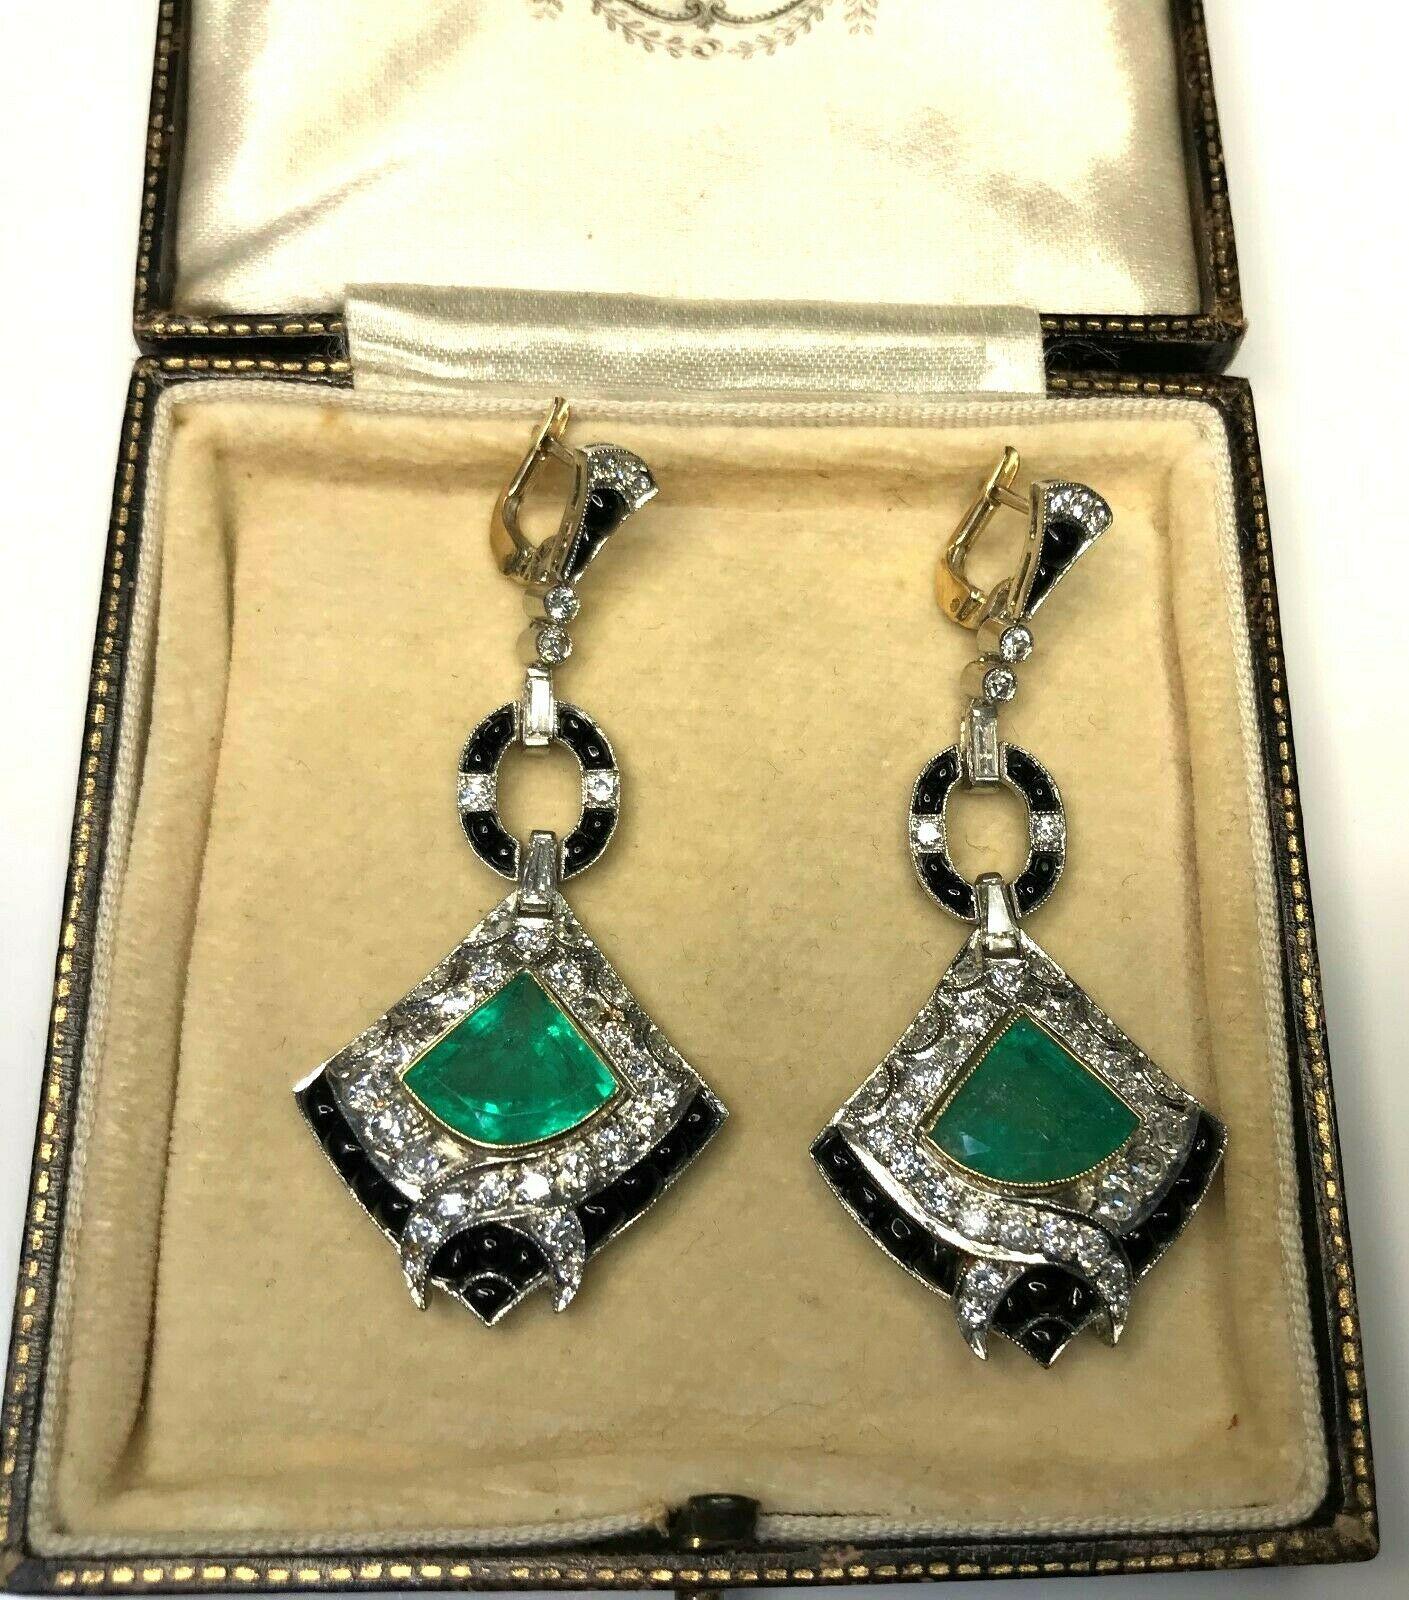 Estate Antique Art Deco 8.58 CTW Diamond Colombian Emerald Onyx Platinum Dangle Earrings


There Are Eighty Eight Round Old European Cut Natural Diamonds, Weighing Approximately 2.58 Carat Total Weight.
Color Grade: G-H
Clarity Grade: VS/SI1

Two